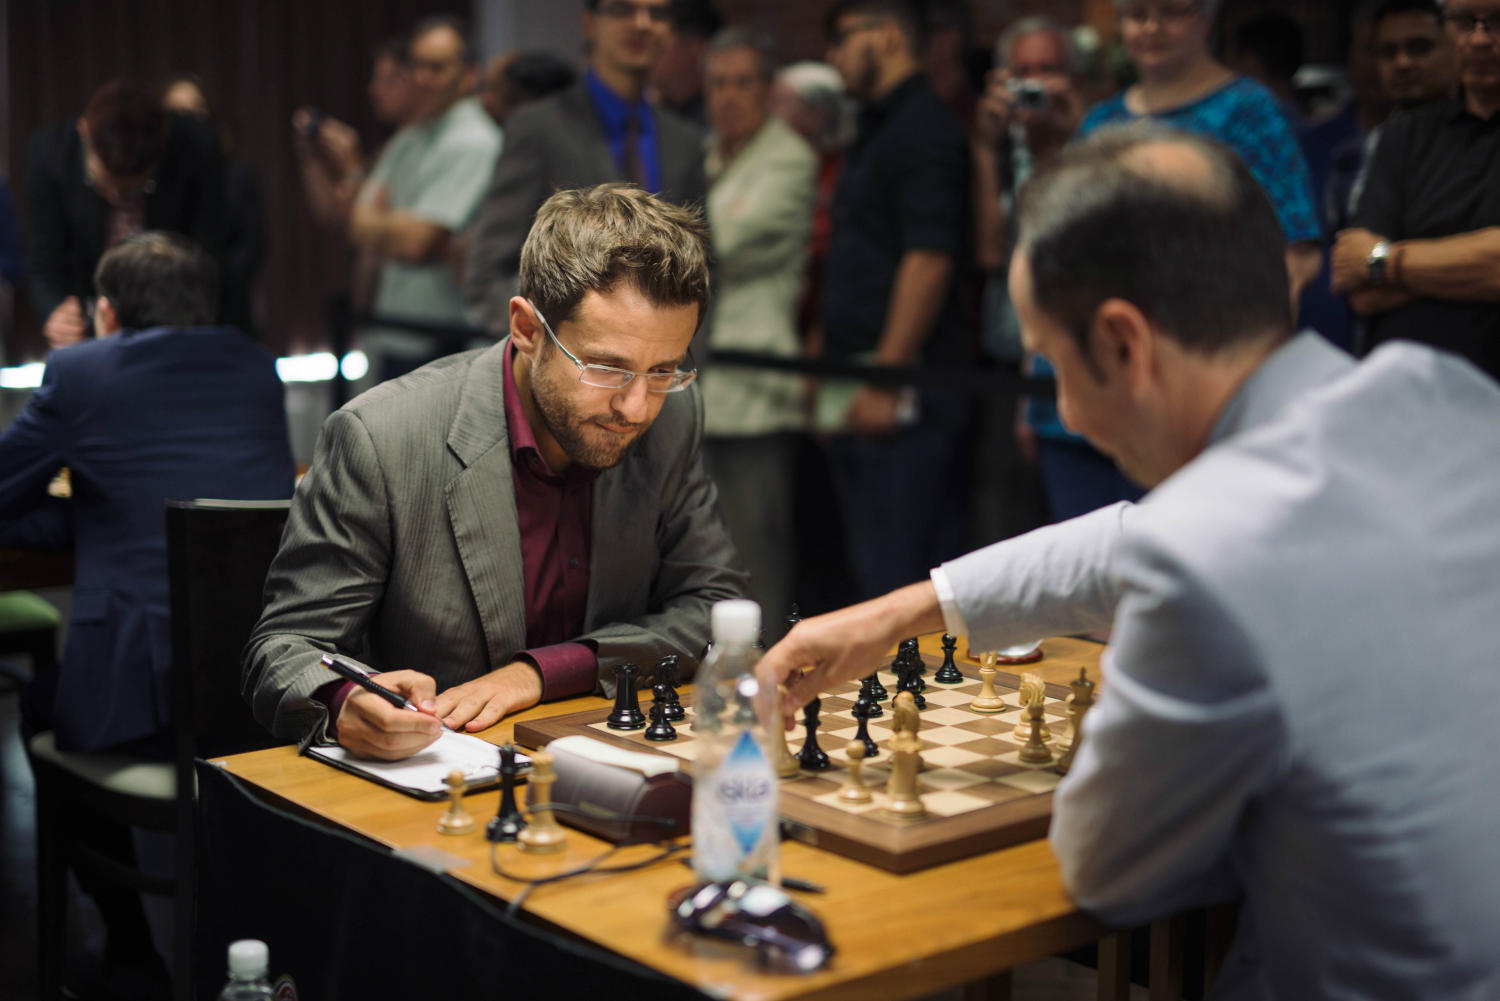 On Chess: Second annual Grand Chess Tour kicks off in Paris, France | St. Louis Public Radio